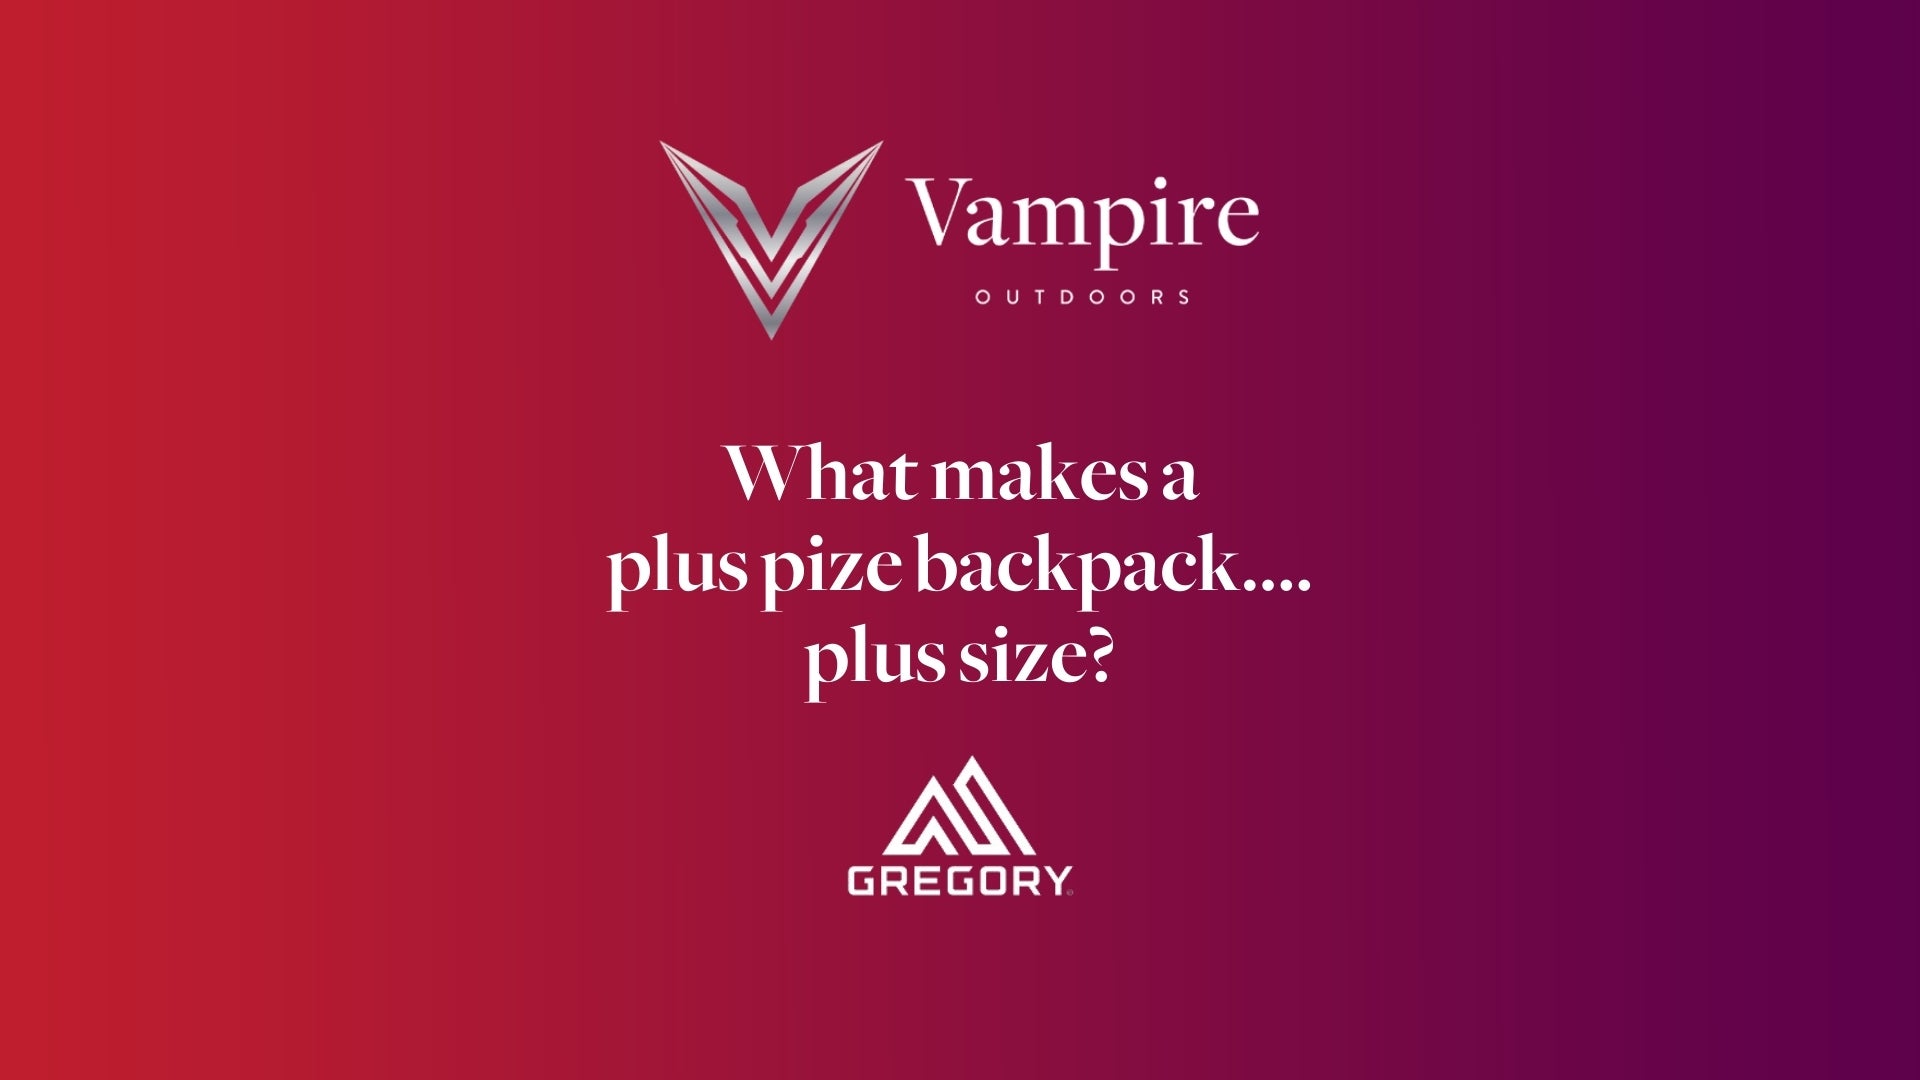 Load video: Rebecca from Vampire Outdoors introduces the features of Gregory plus size backpacks